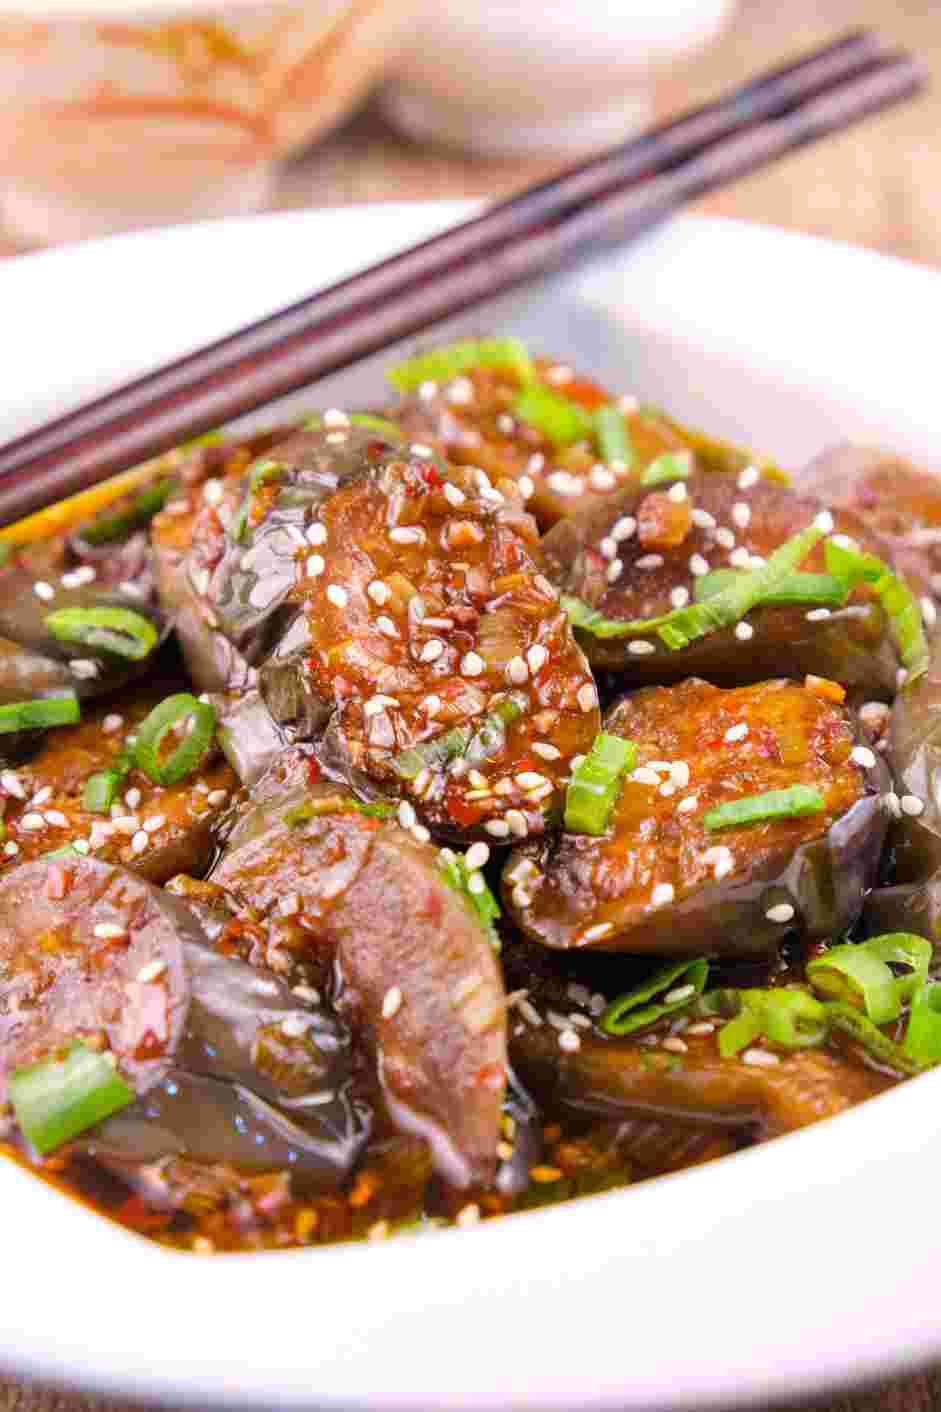 Chinese Eggplant Recipe: Remove the eggplant from the wok and scoop it into a bowl for serving.